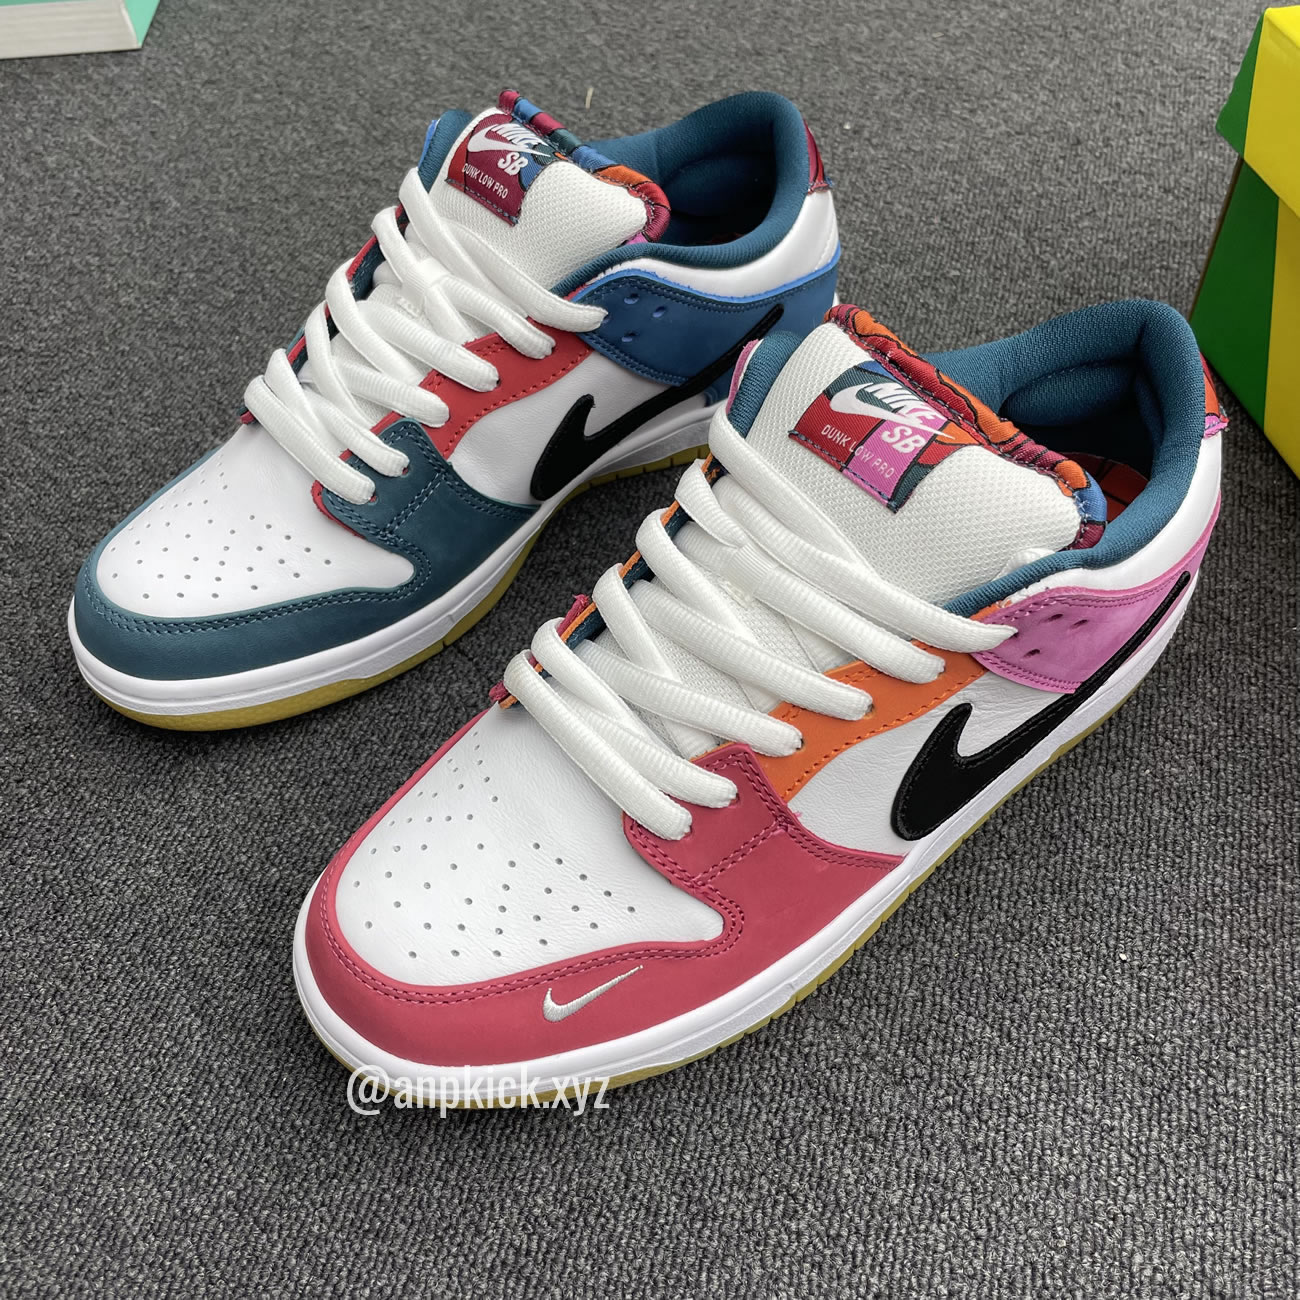 Parra Nike Sb Dunk Low Collab Summer 2021 Colorway Surfaces Dh7695 100 (7) - newkick.org